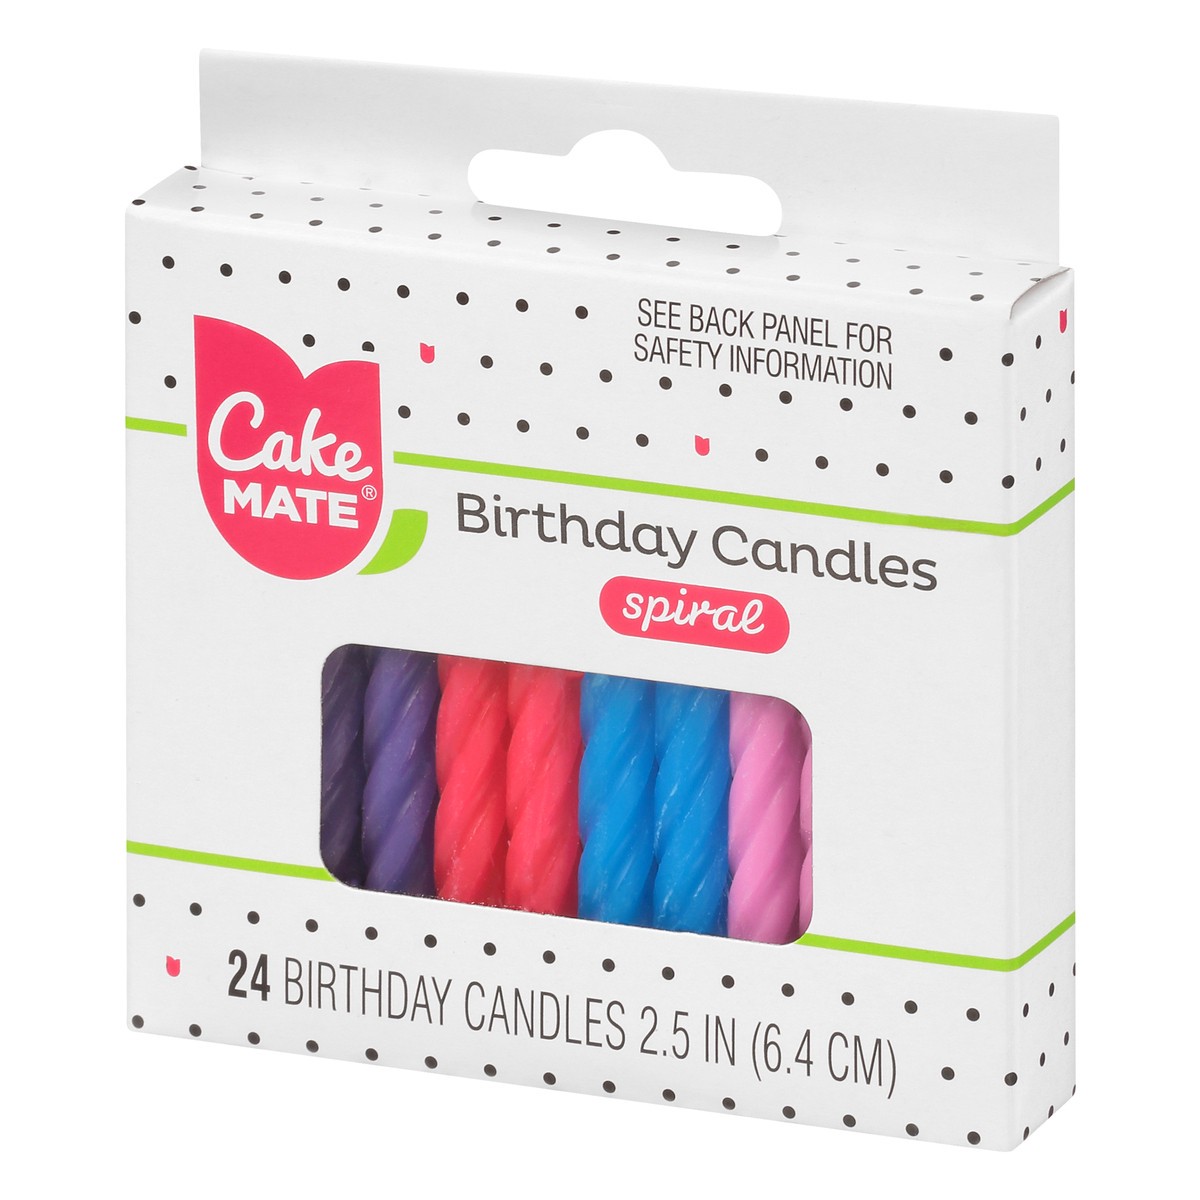 slide 3 of 9, Cake Mate 2.5 Inch Spiral Birthday Candles 24 ea, 24 ct